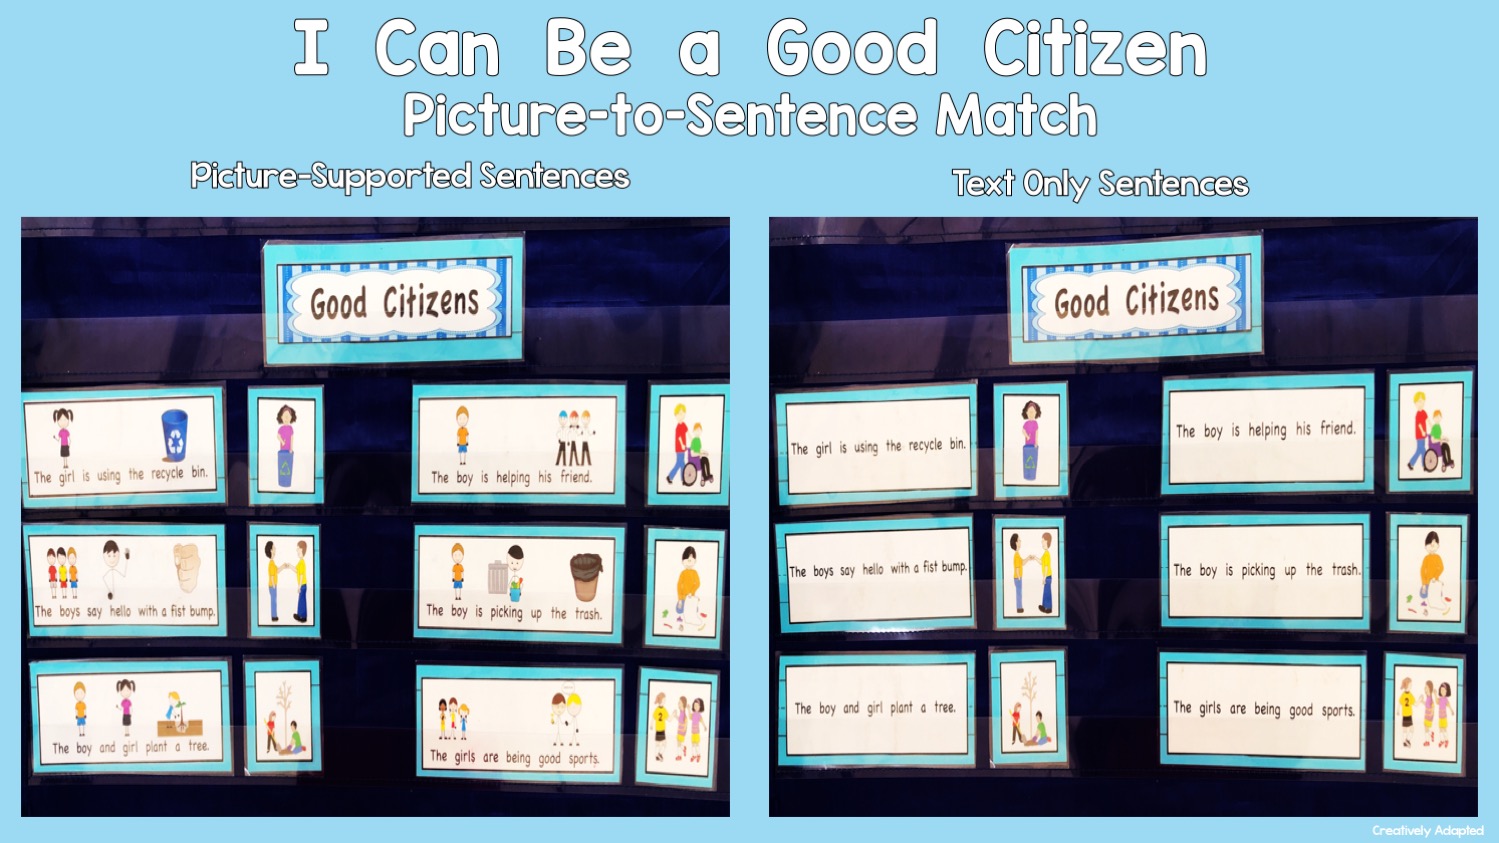 How do I Teach the Concept of Citizenship? - Creatively Adapted